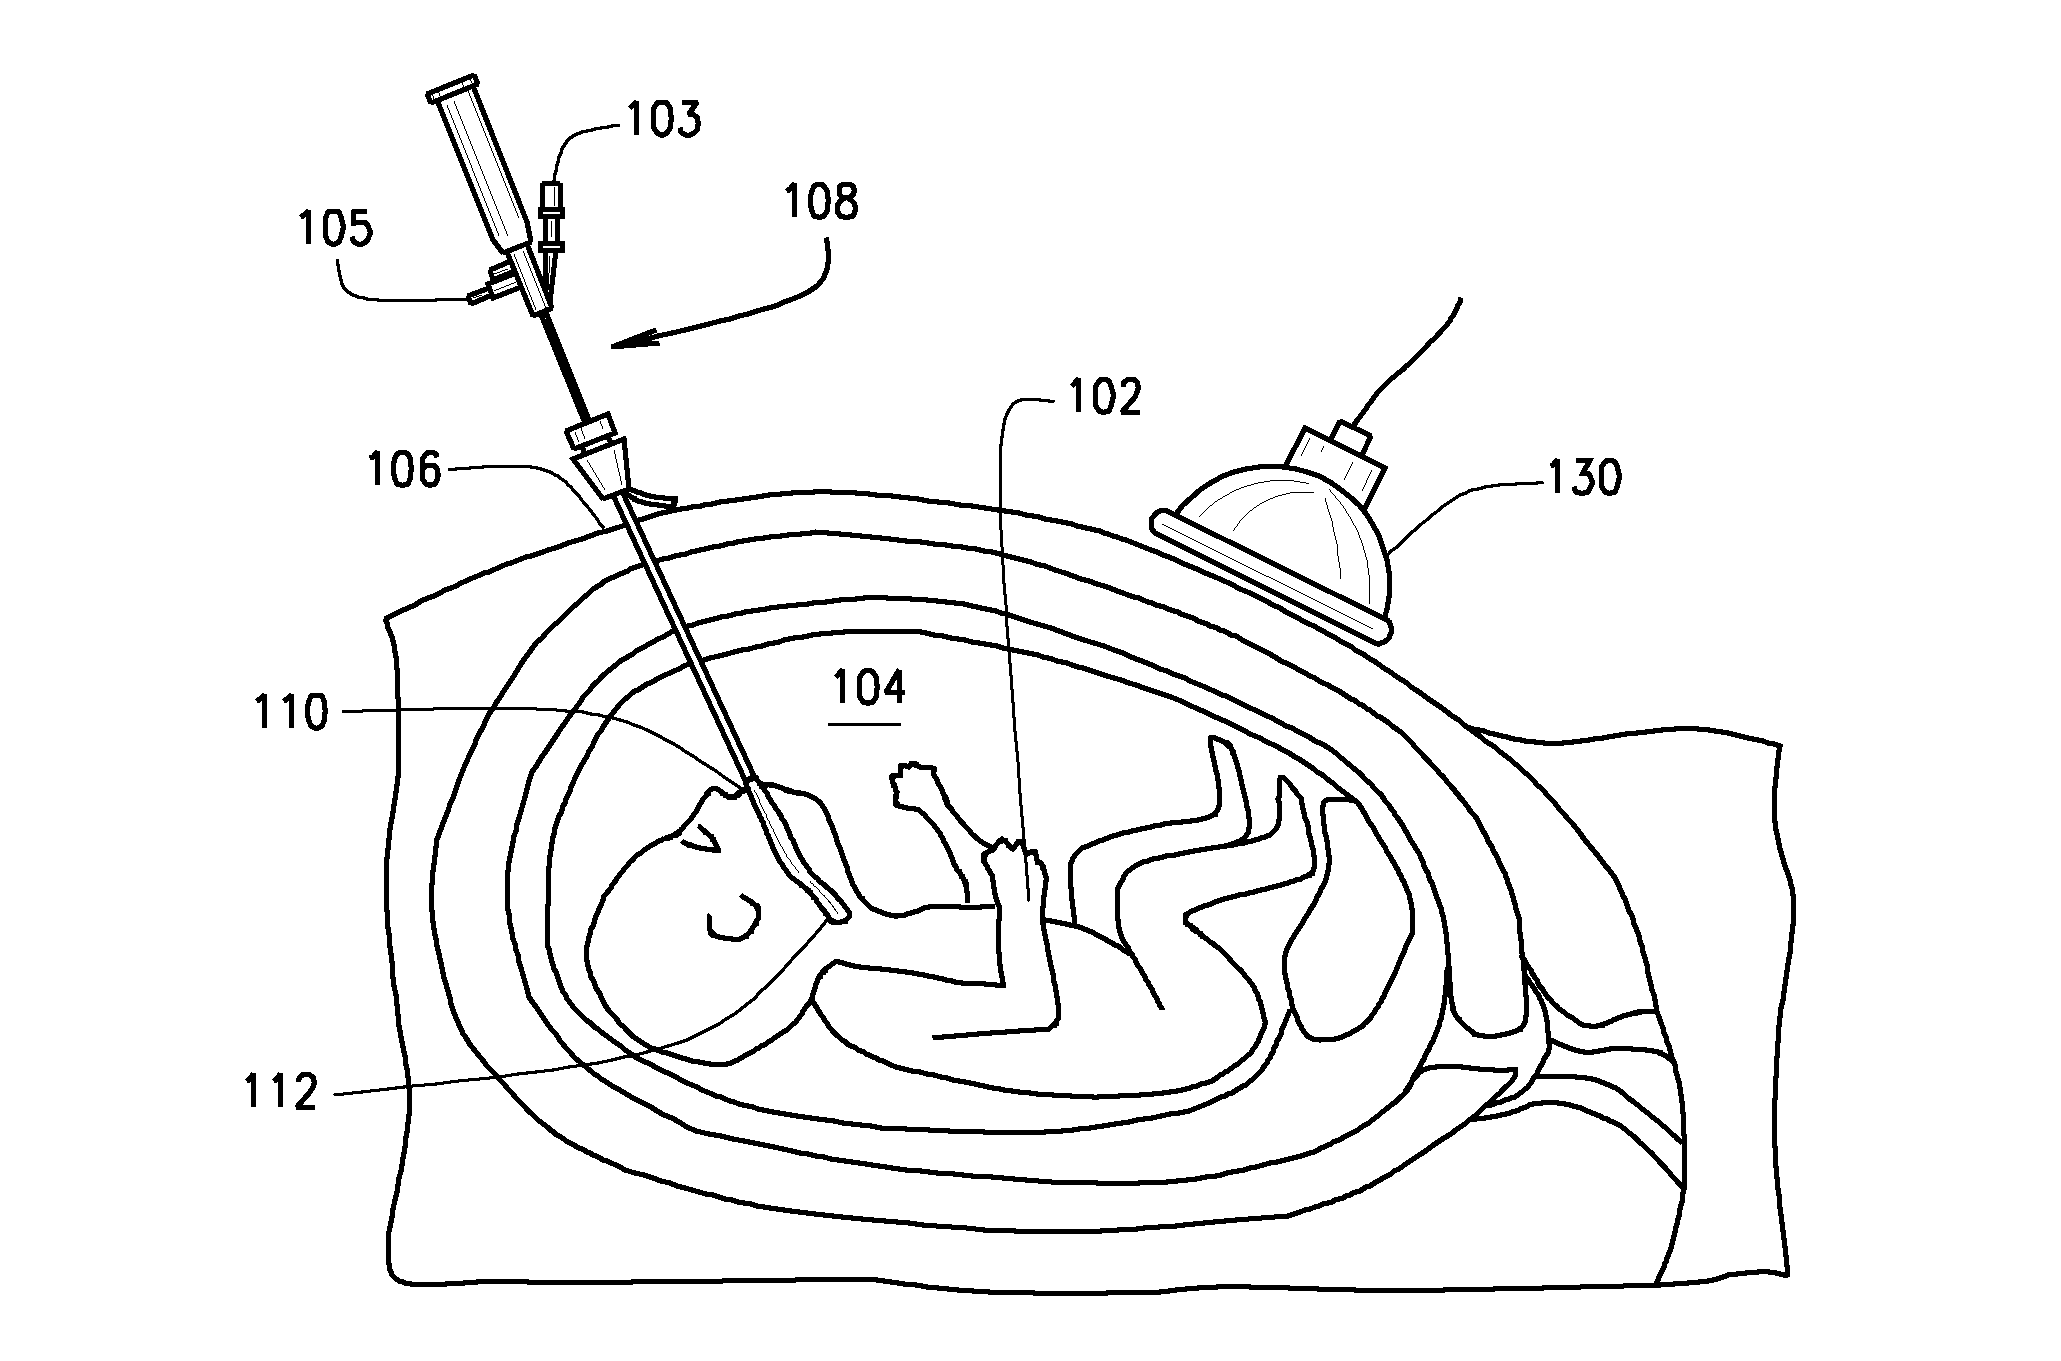 Method and apparatus for delivery into the fetal trachea